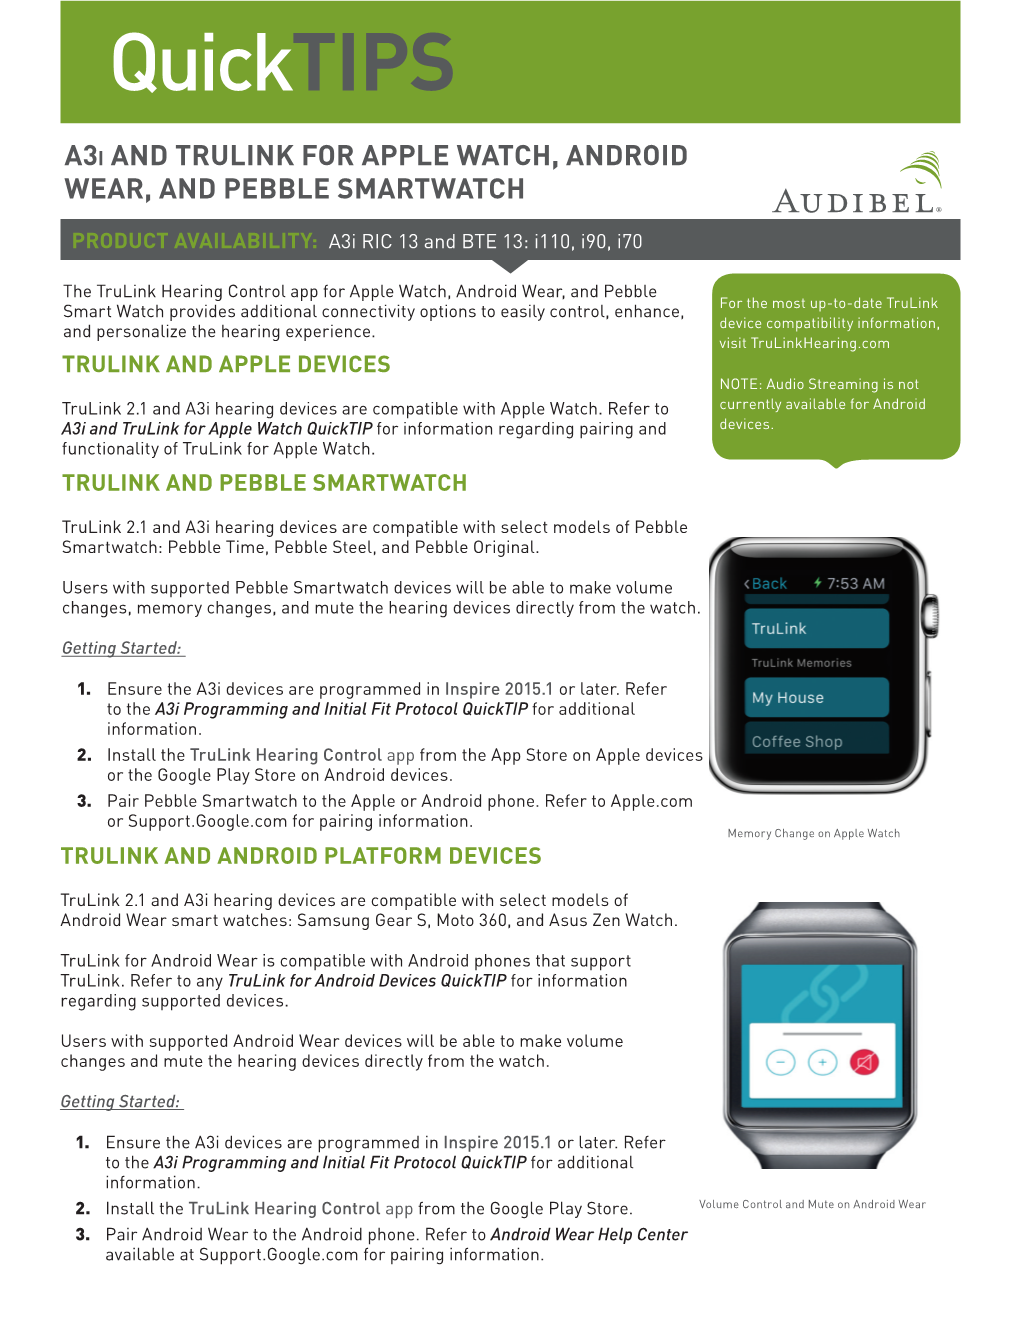 A3i and Trulink for Apple Watch, Android Wear and Pebble Smartwatch